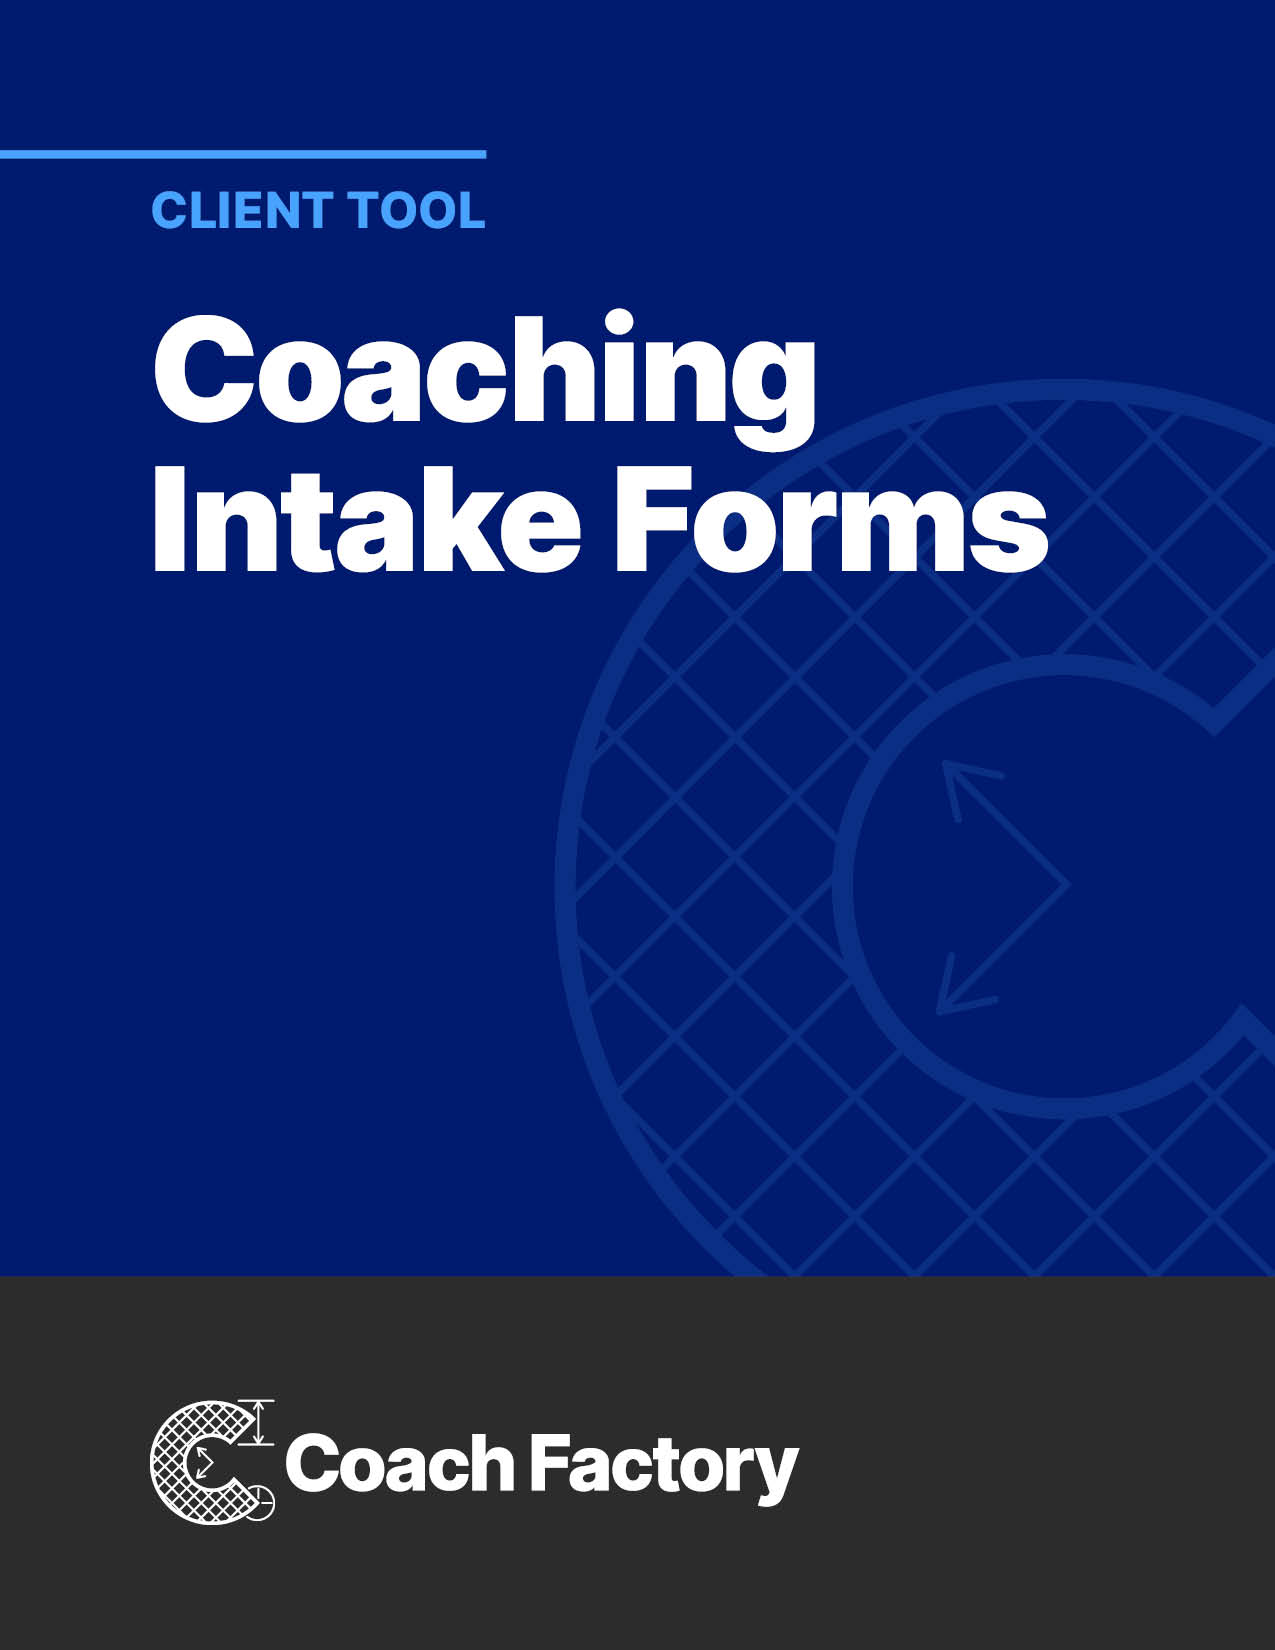 Client Tool: Coaching Intake Forms